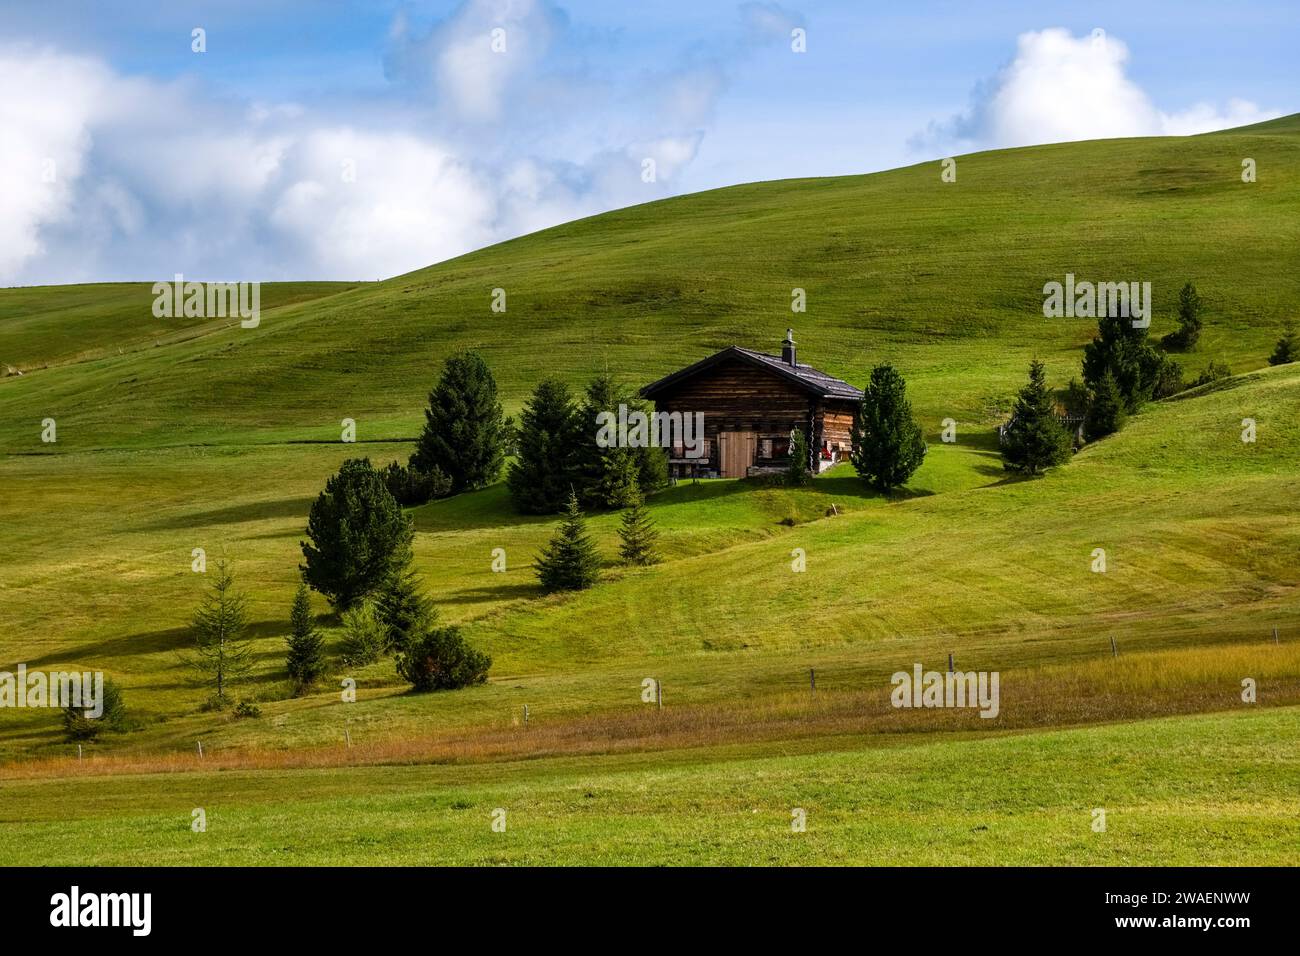 Hilly agricultural countryside with a wooden hut and trees at Seiser Alm, Alpe di Siusi. Stock Photo